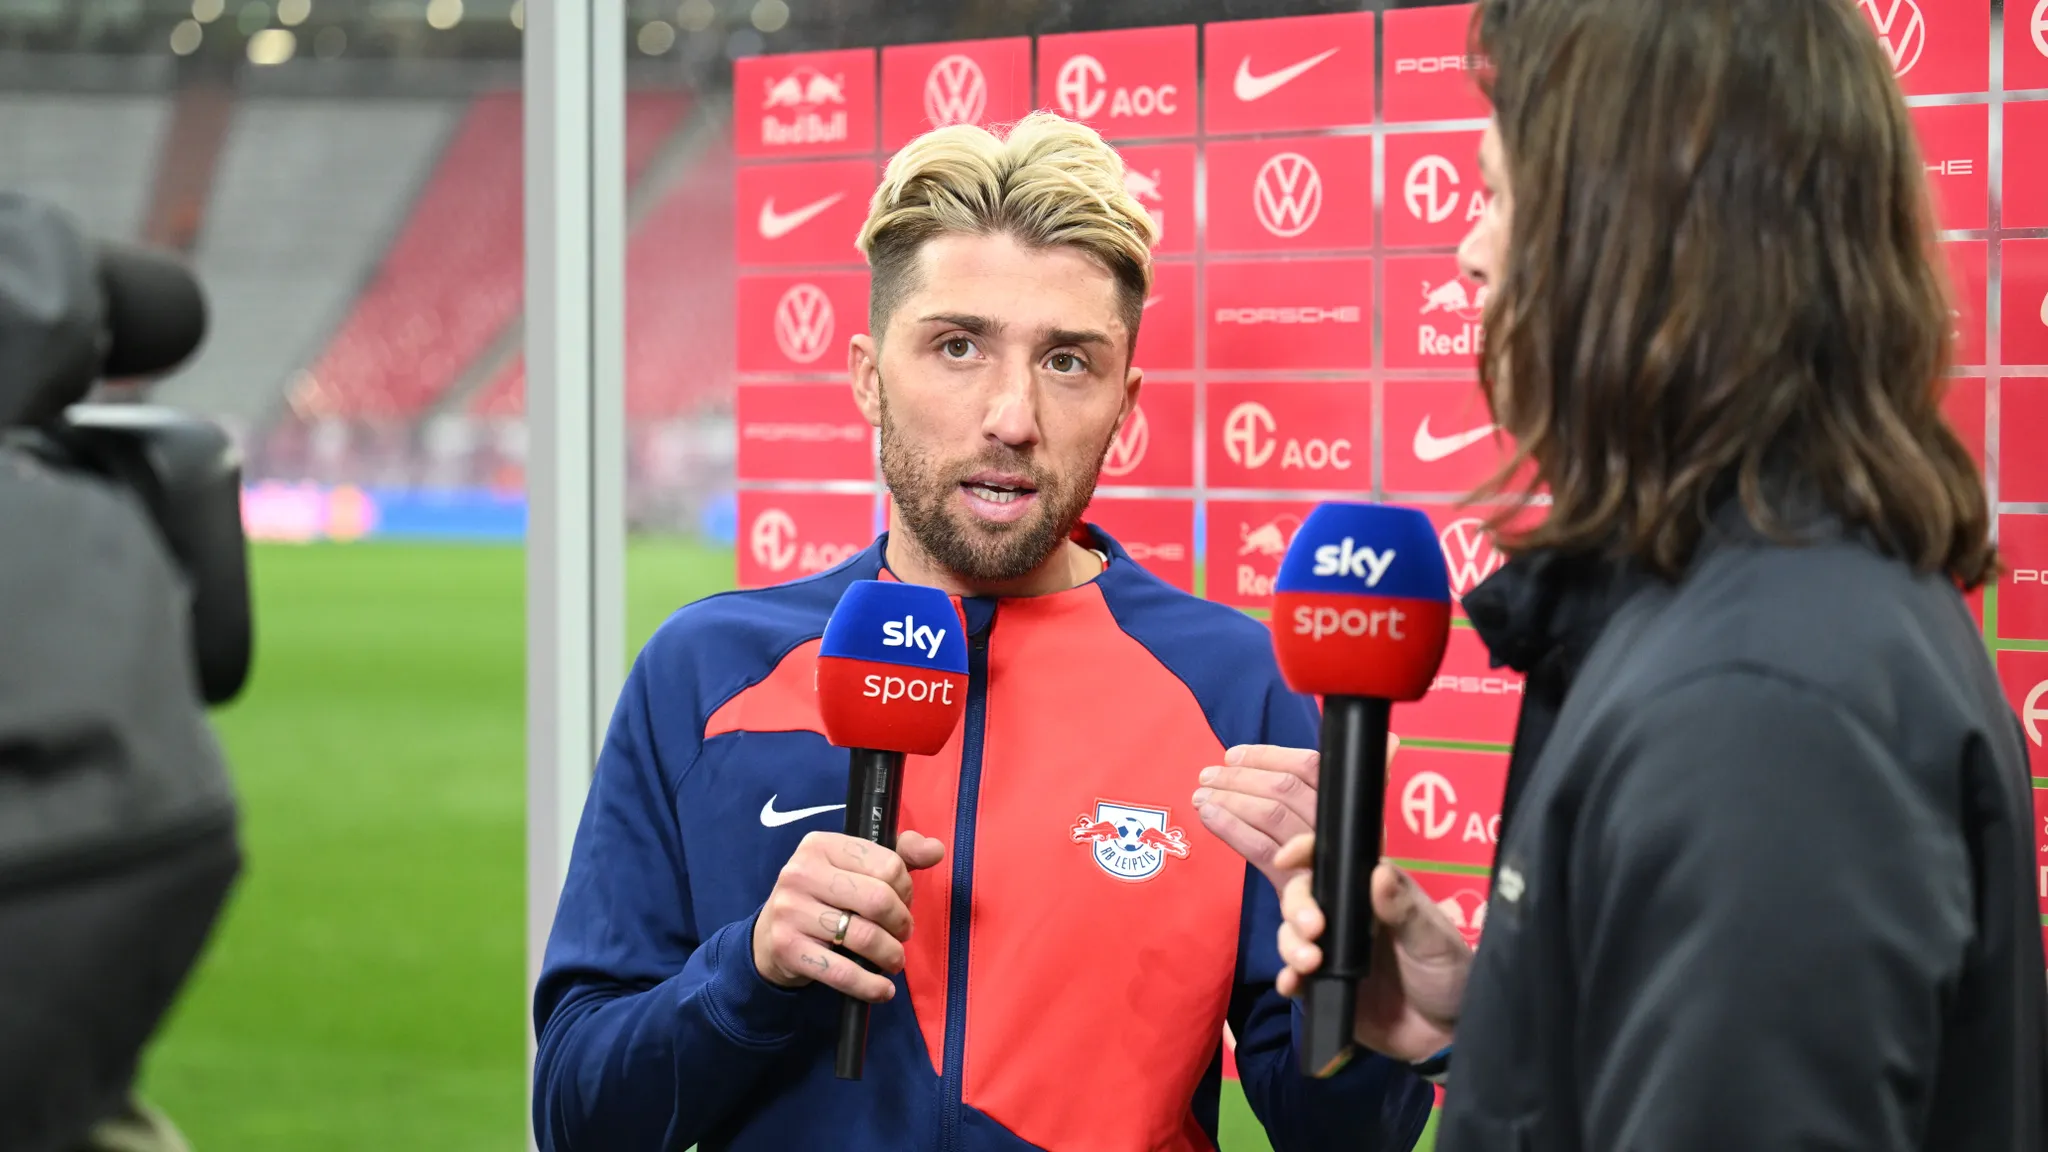 Kevin Kampl spoke of the “missing can opener”.